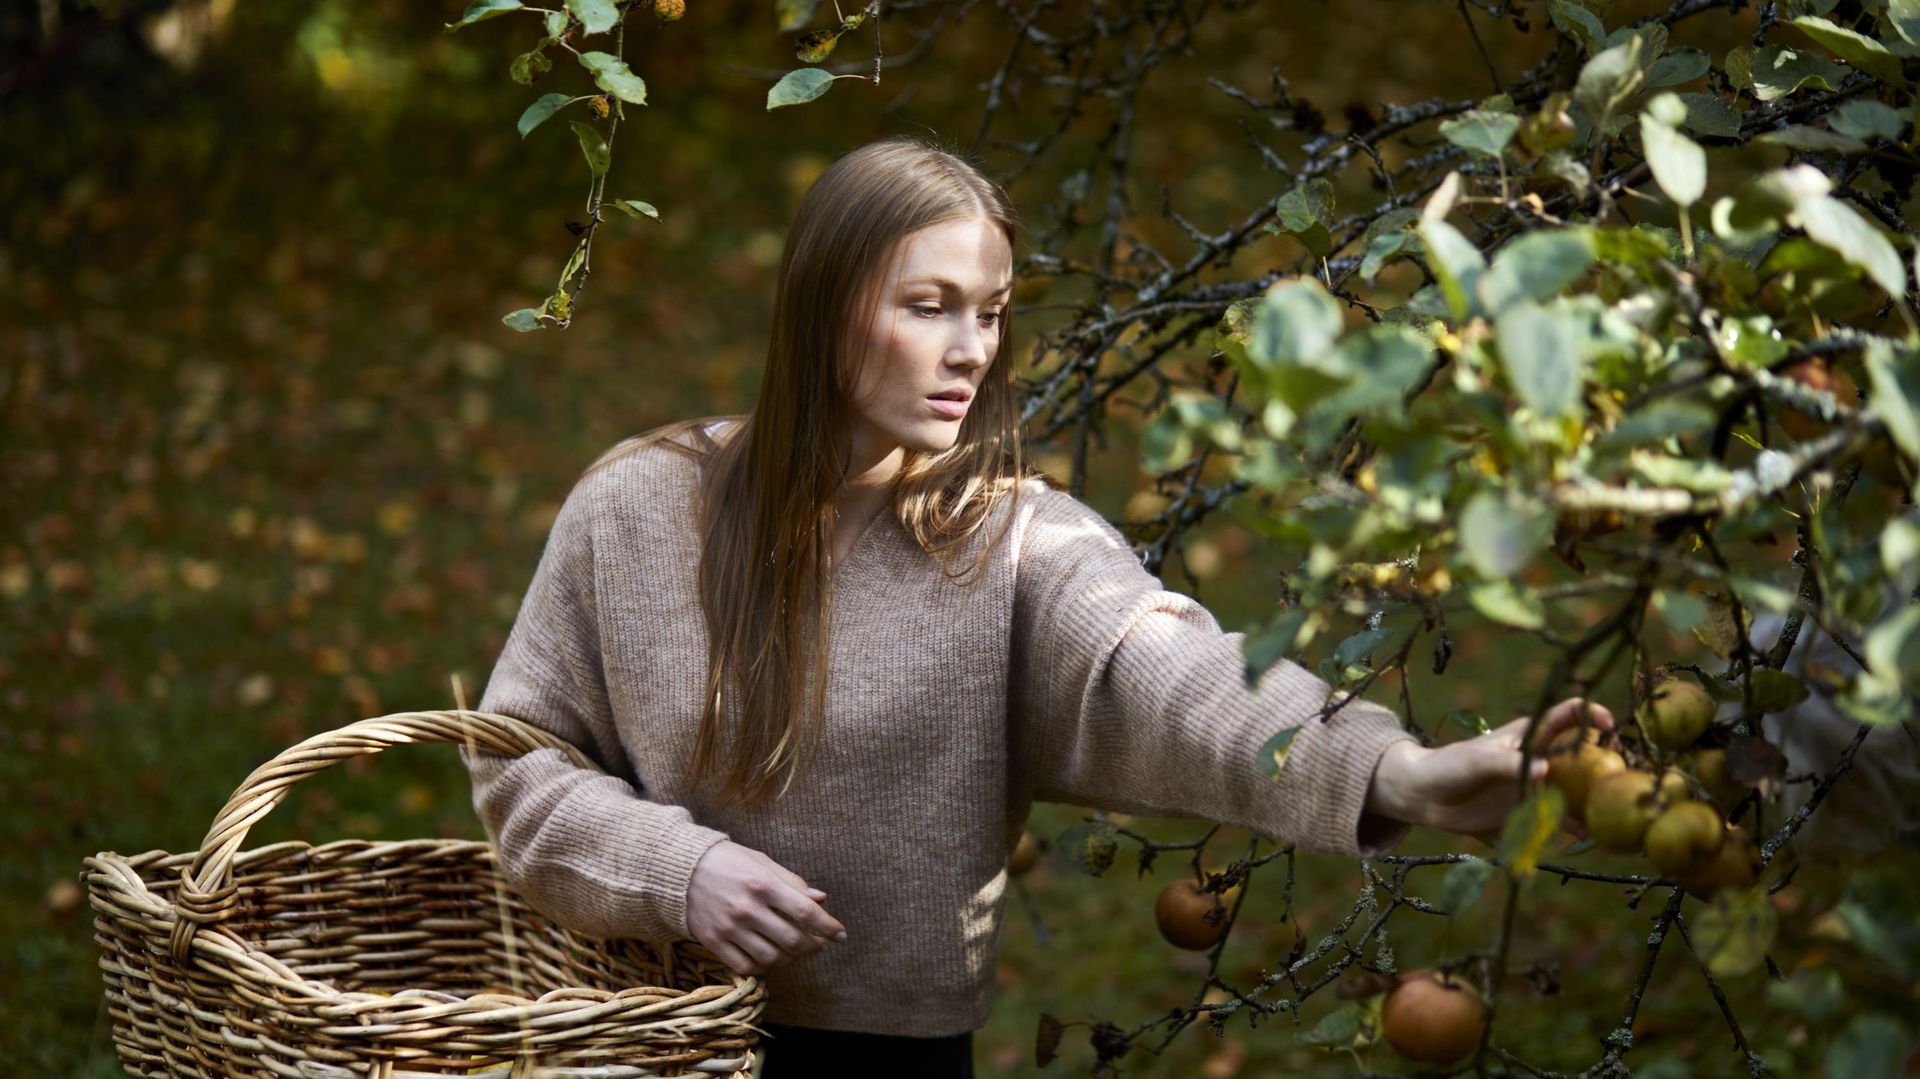 Young woman harvesting apples from treee in autumn